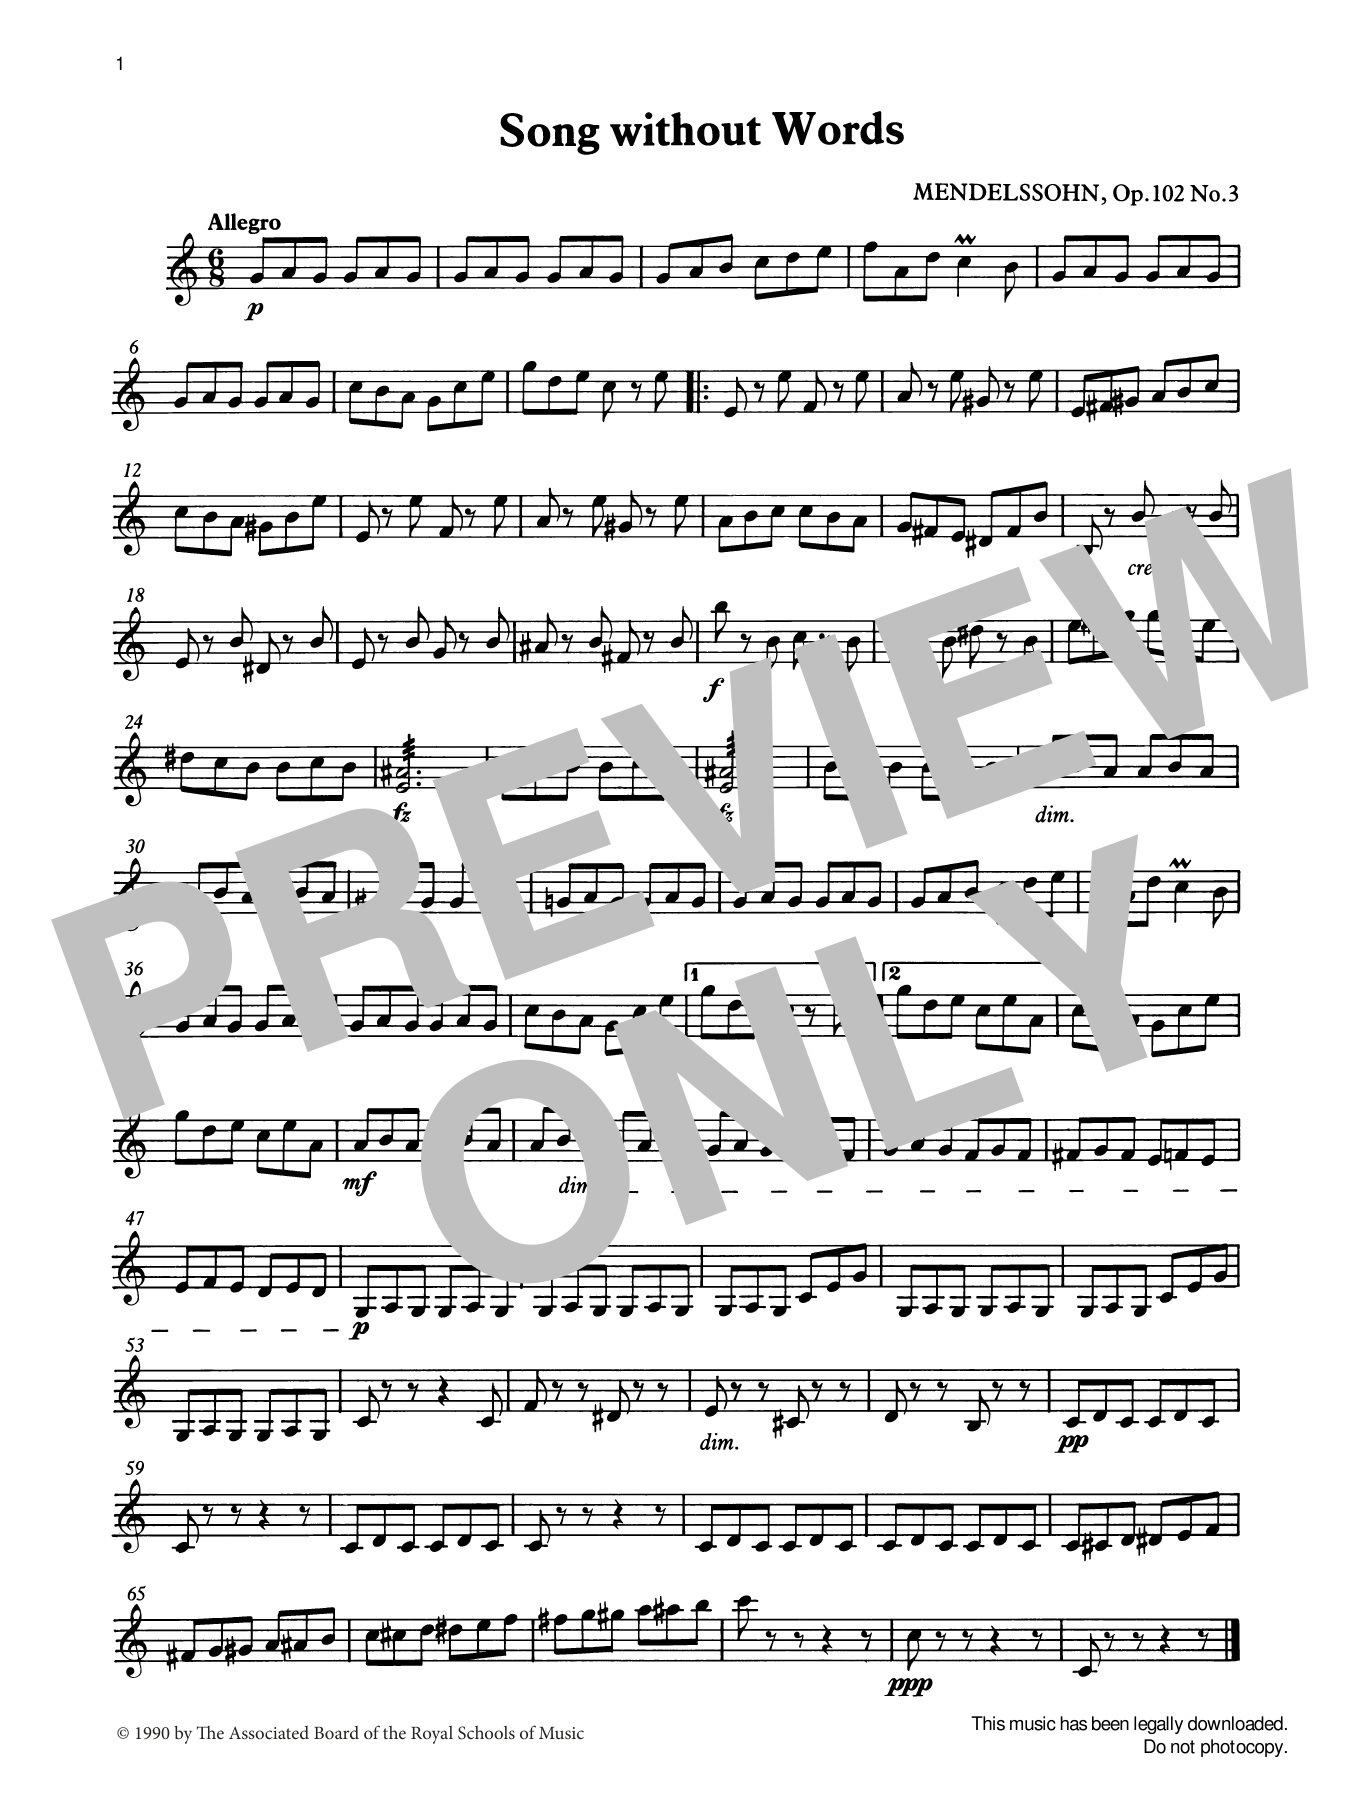 Download Felix Mendelssohn Song without Words from Graded Music fo Sheet Music